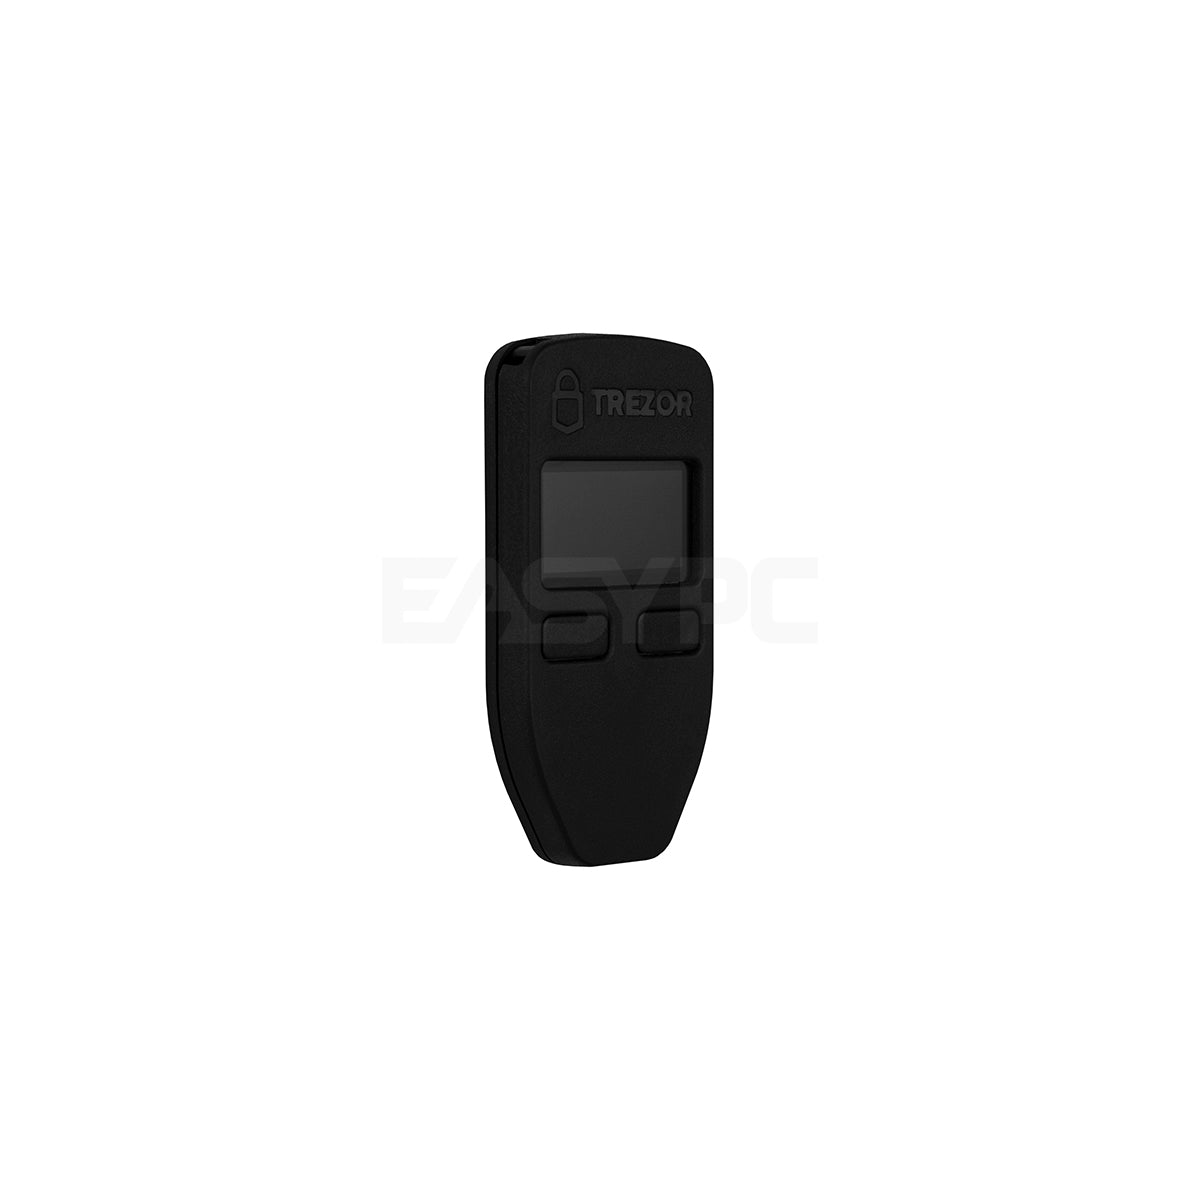 Trezor Ultimate Pack, Size: One size, White